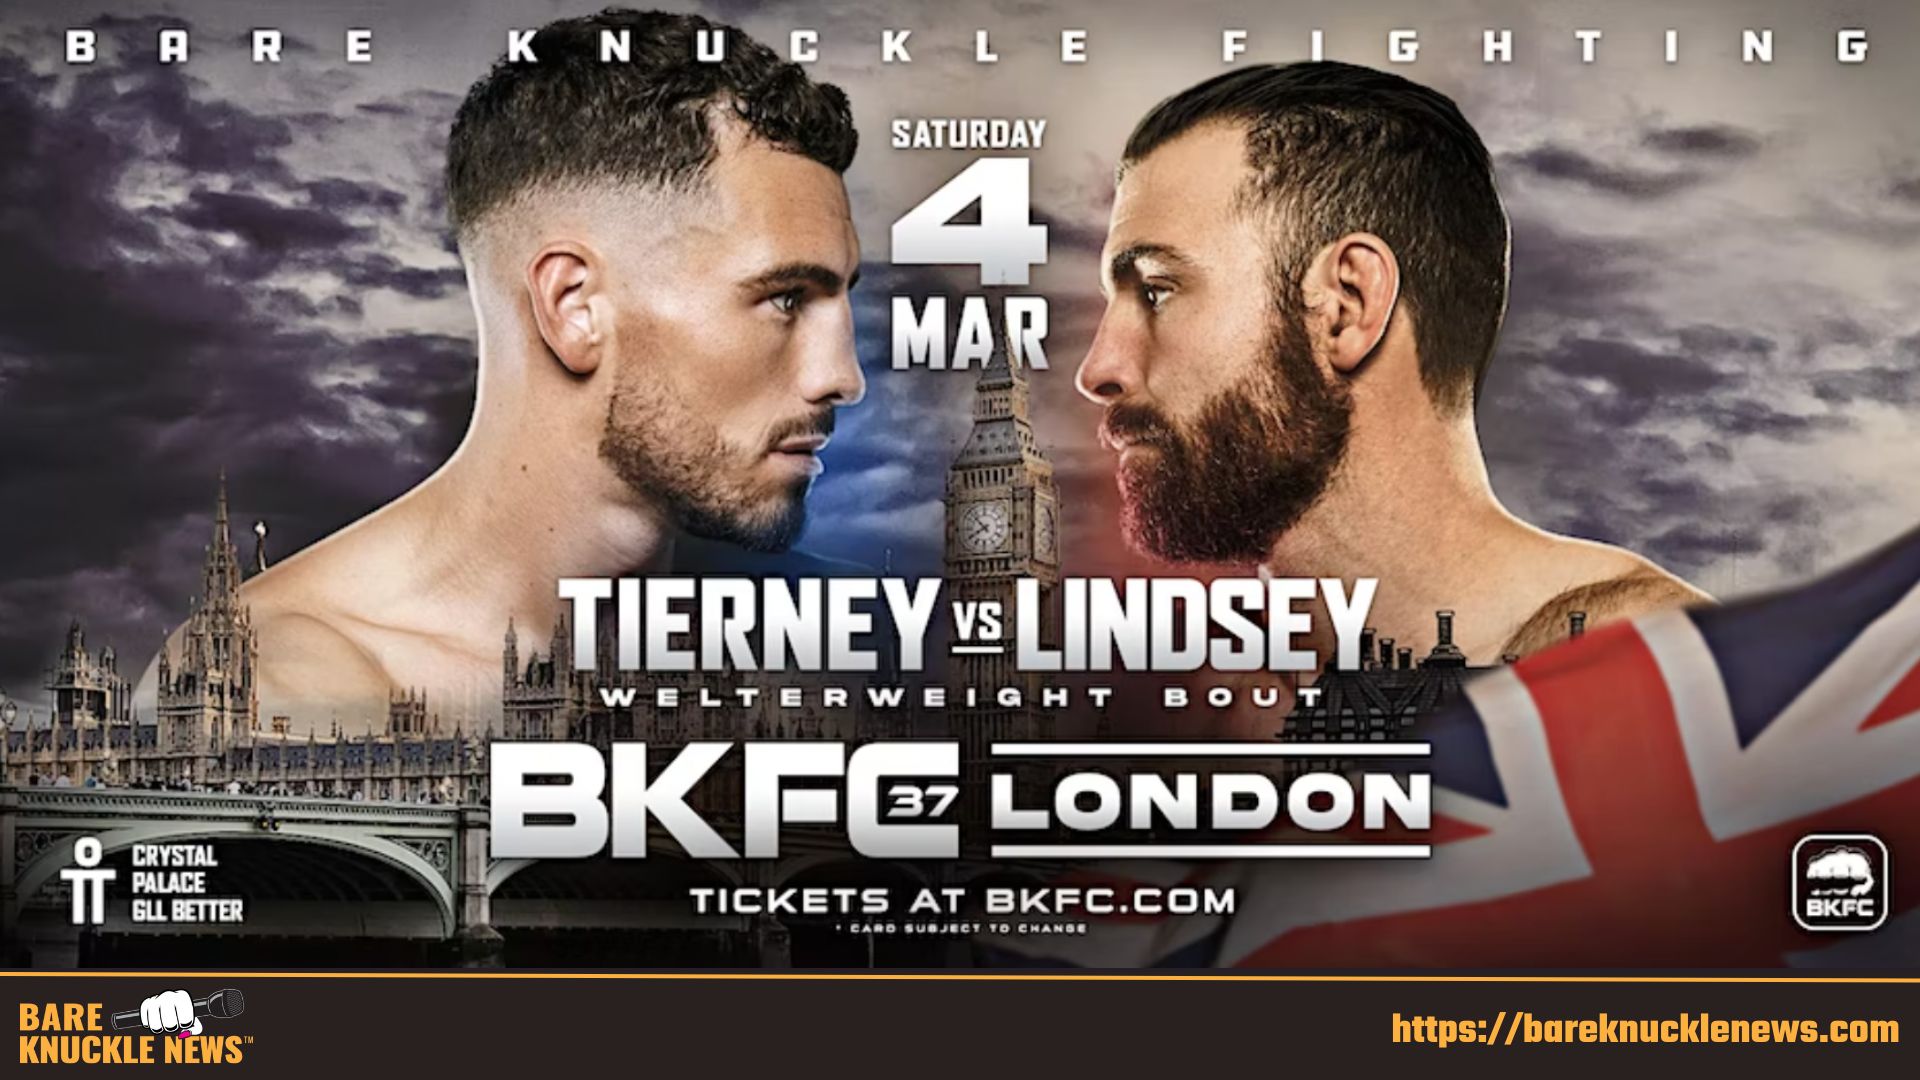 BKFC 37 London Tierney Vs. Lindsey by Bare Knuckle News and Susan Cingari